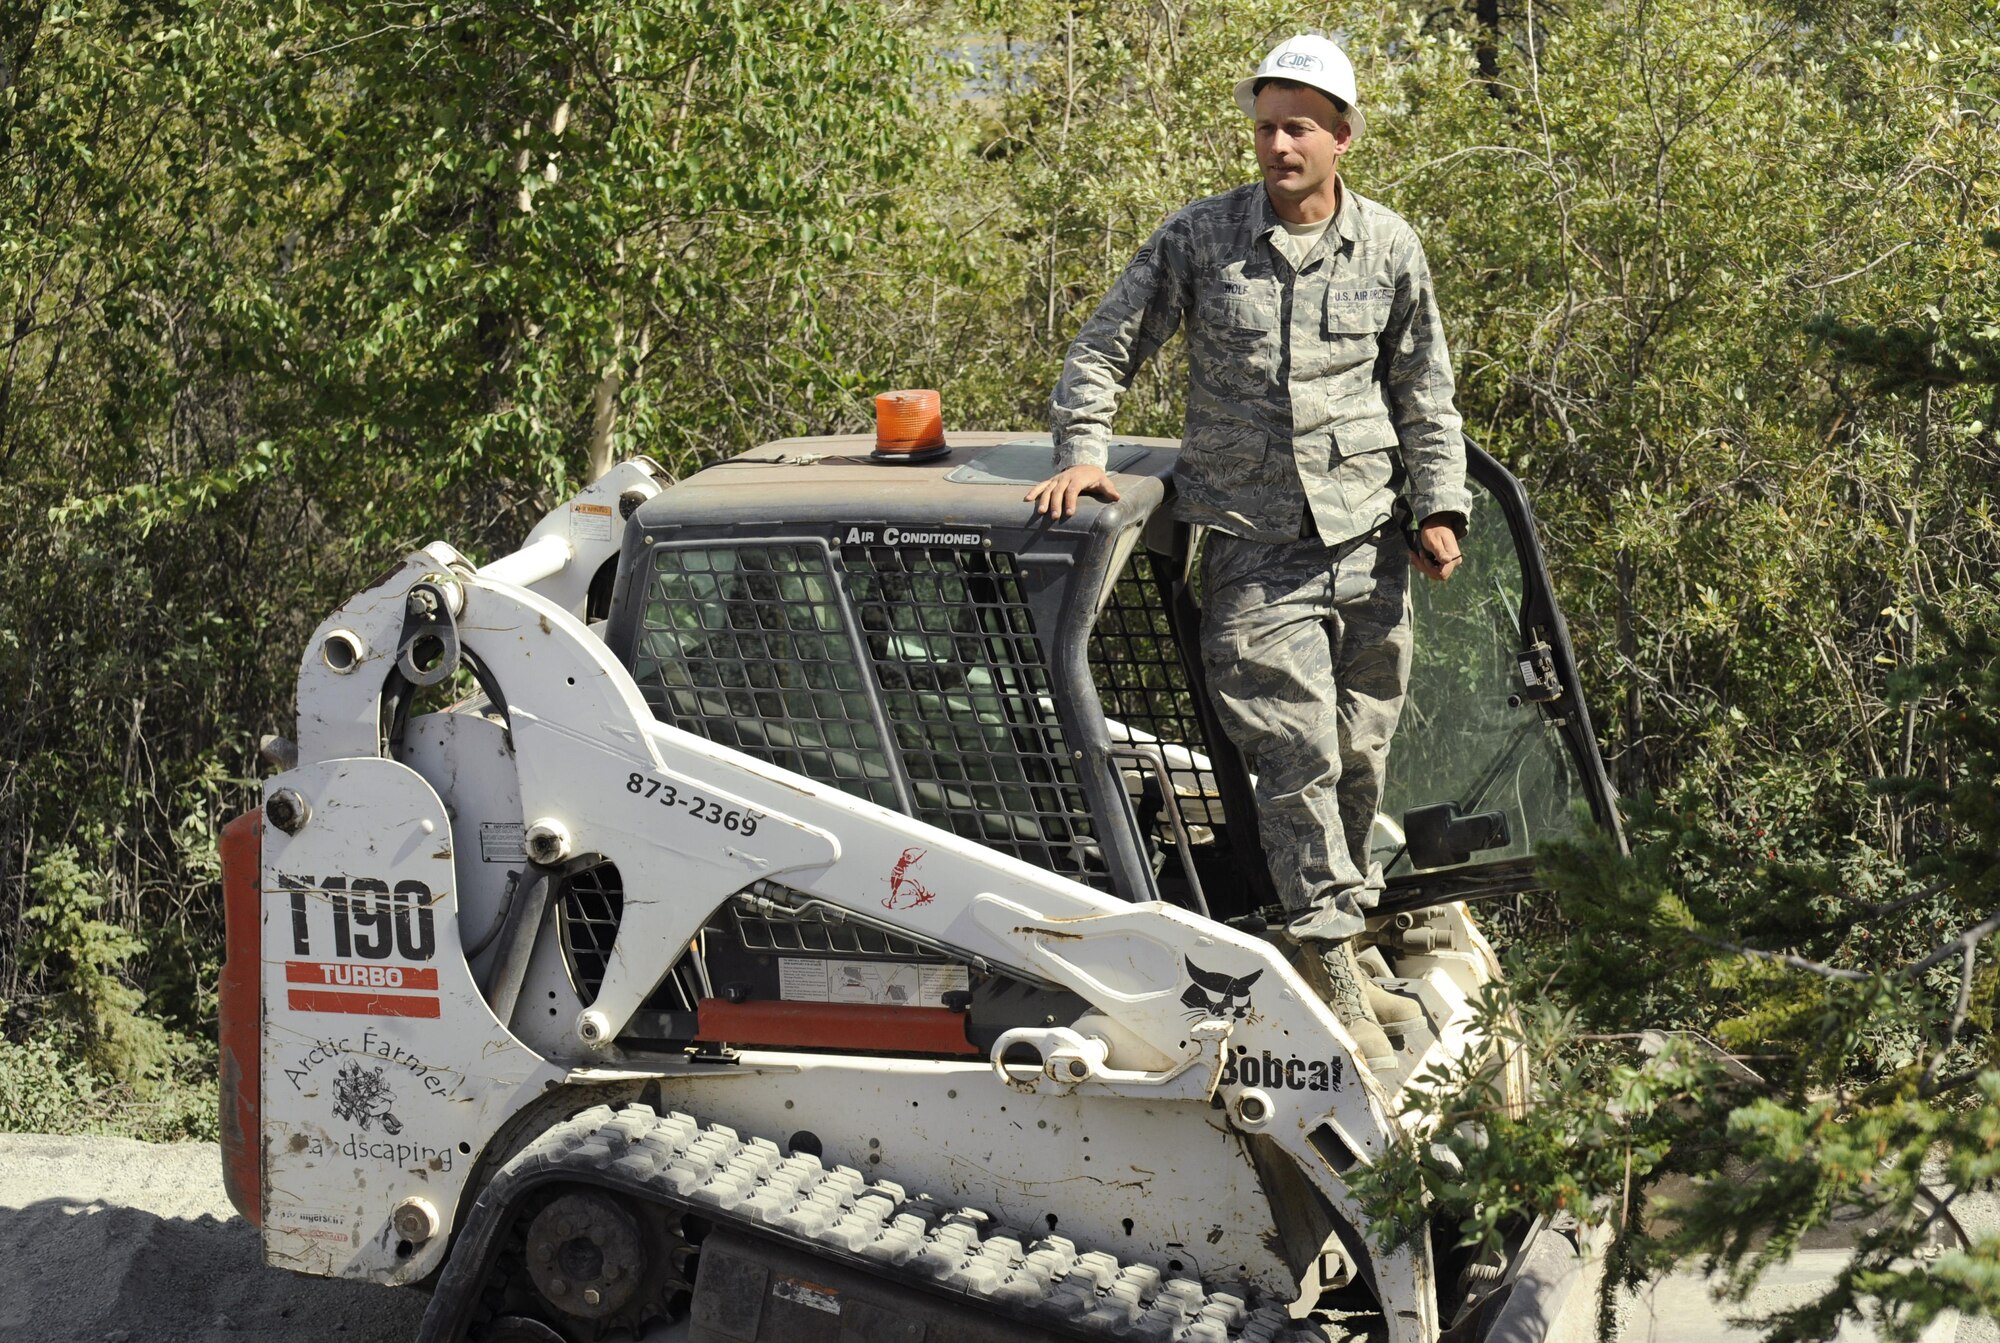 Oregon Air National Guard Senior Airman Andrew Wolf, assigned to the 142nd Fighter Wing Civil Engineers (CES) takes a short break to observe the delivery of more materials for the trail extension he and other members of the CES are working on at Niven Lake Trail, Yellowknife, Northwest Territories, Canada, July 18, 2017. The CES members are spending two-weeks in Canada working on a variety of projects during their Deployment for Training (DFT). (U.S. Air National Guard photo/Master Sgt. John Hughel, 142nd Fighter Wing Public Affairs)